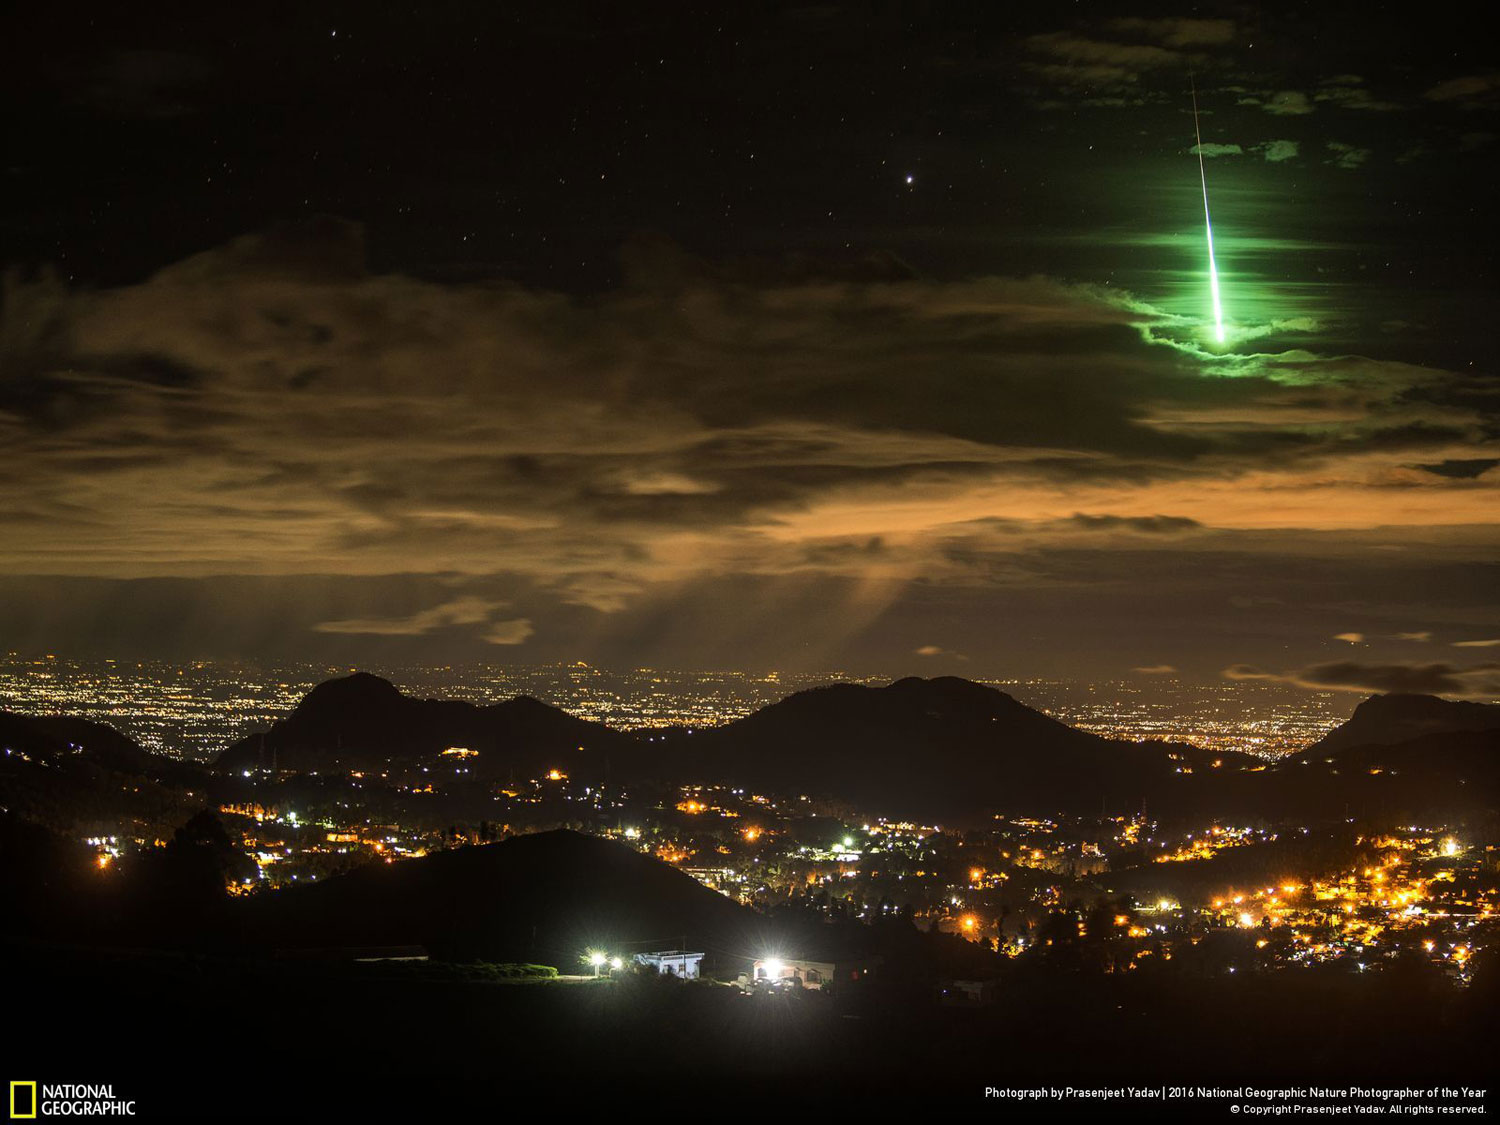 Serendipitous Green Meteor // Photo and caption by Prasenjeet Yadav